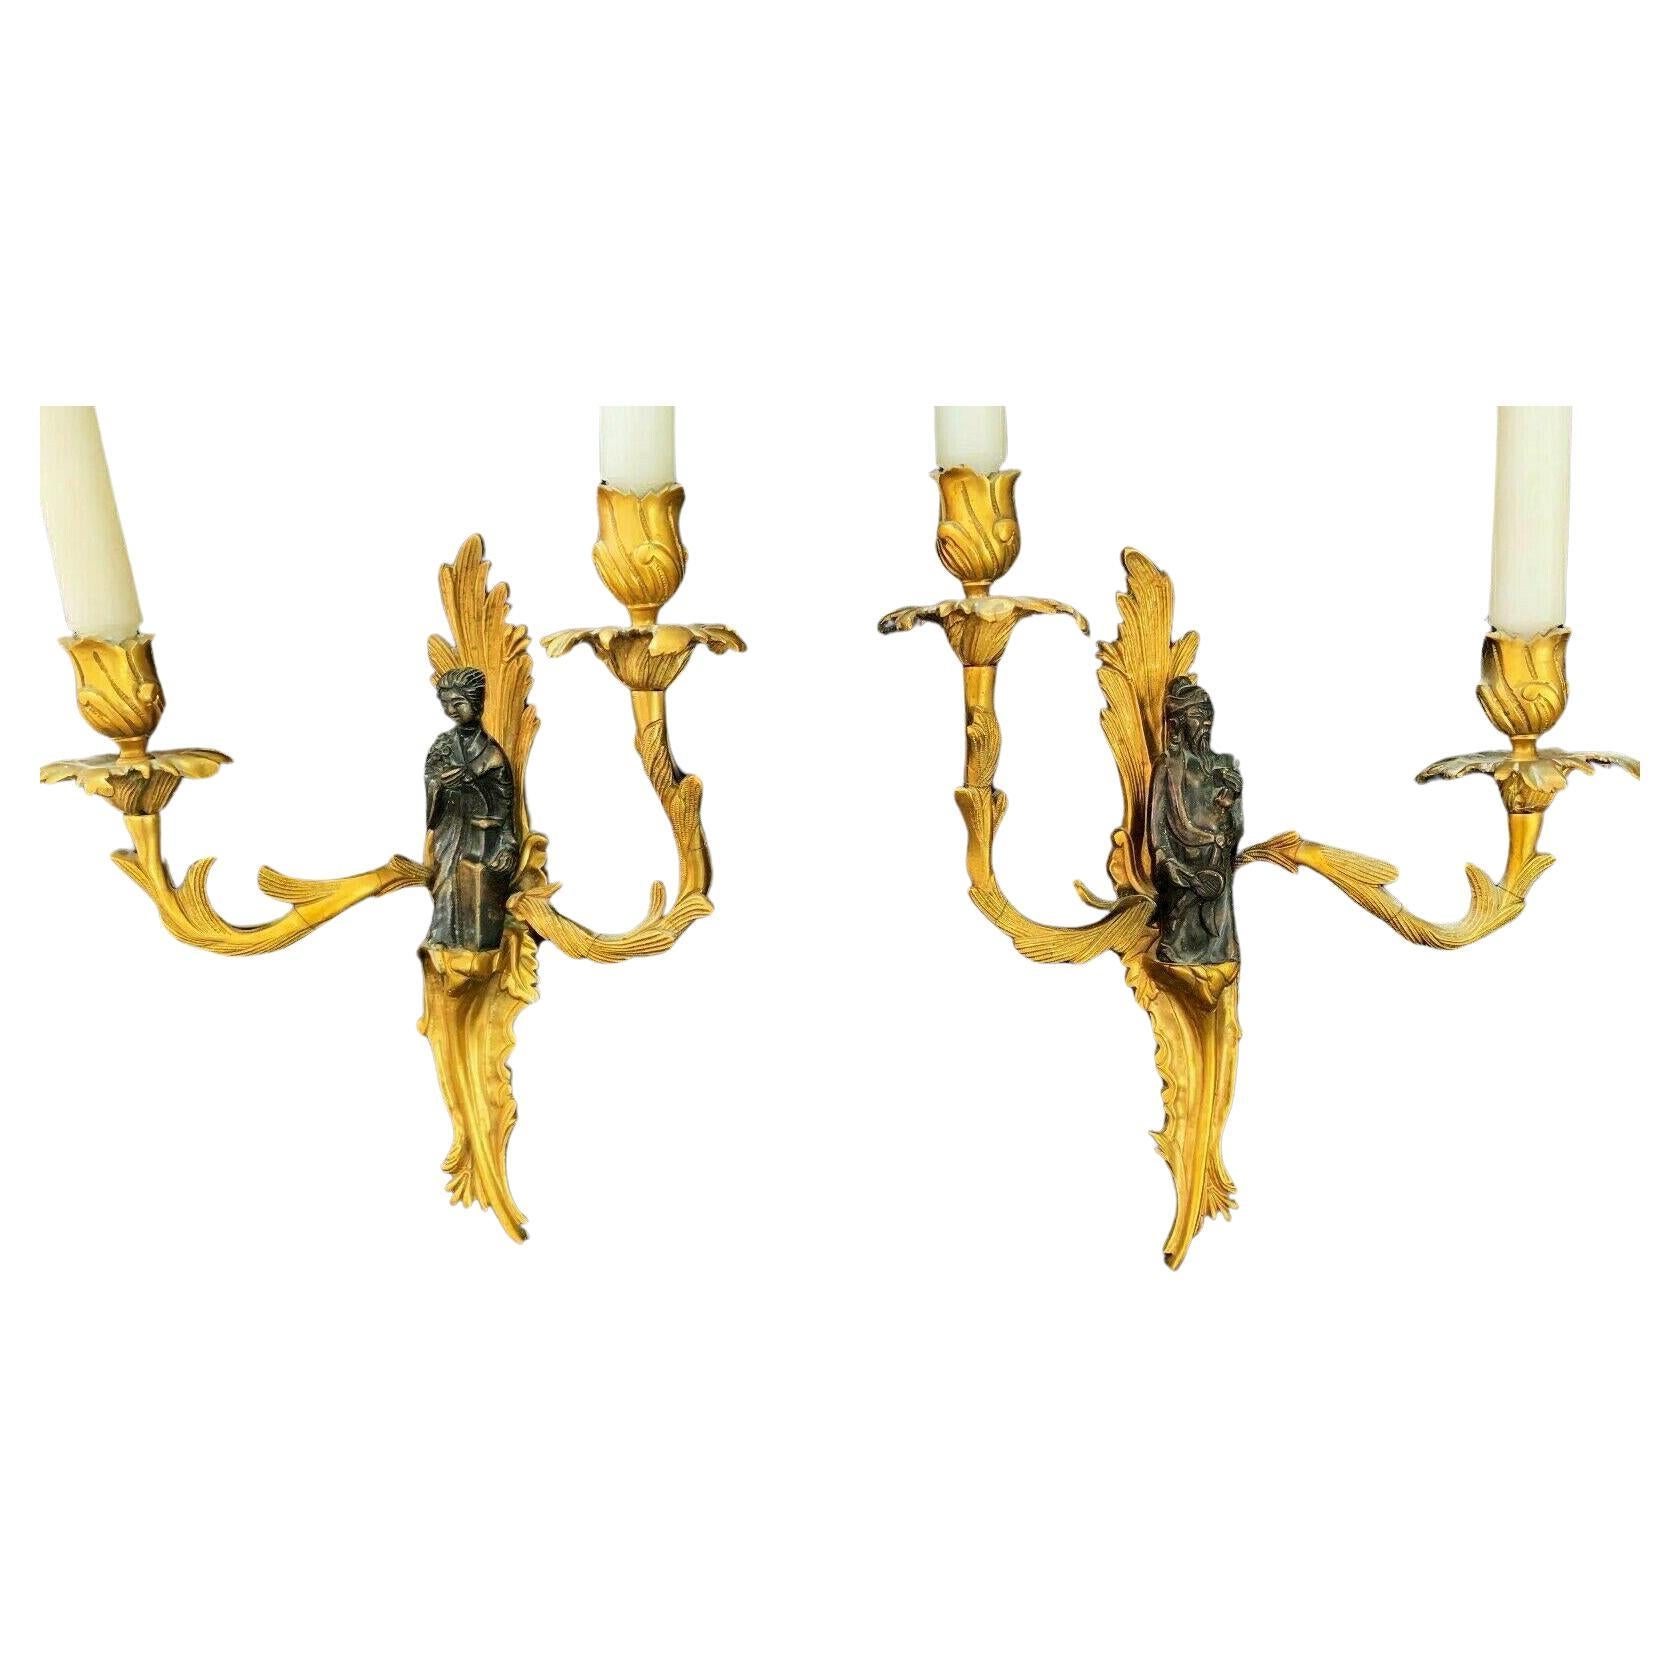 Pr. Antique French Maison Bagues style Chinoiserie Gilt & Patinated Wall Sconces For Sale